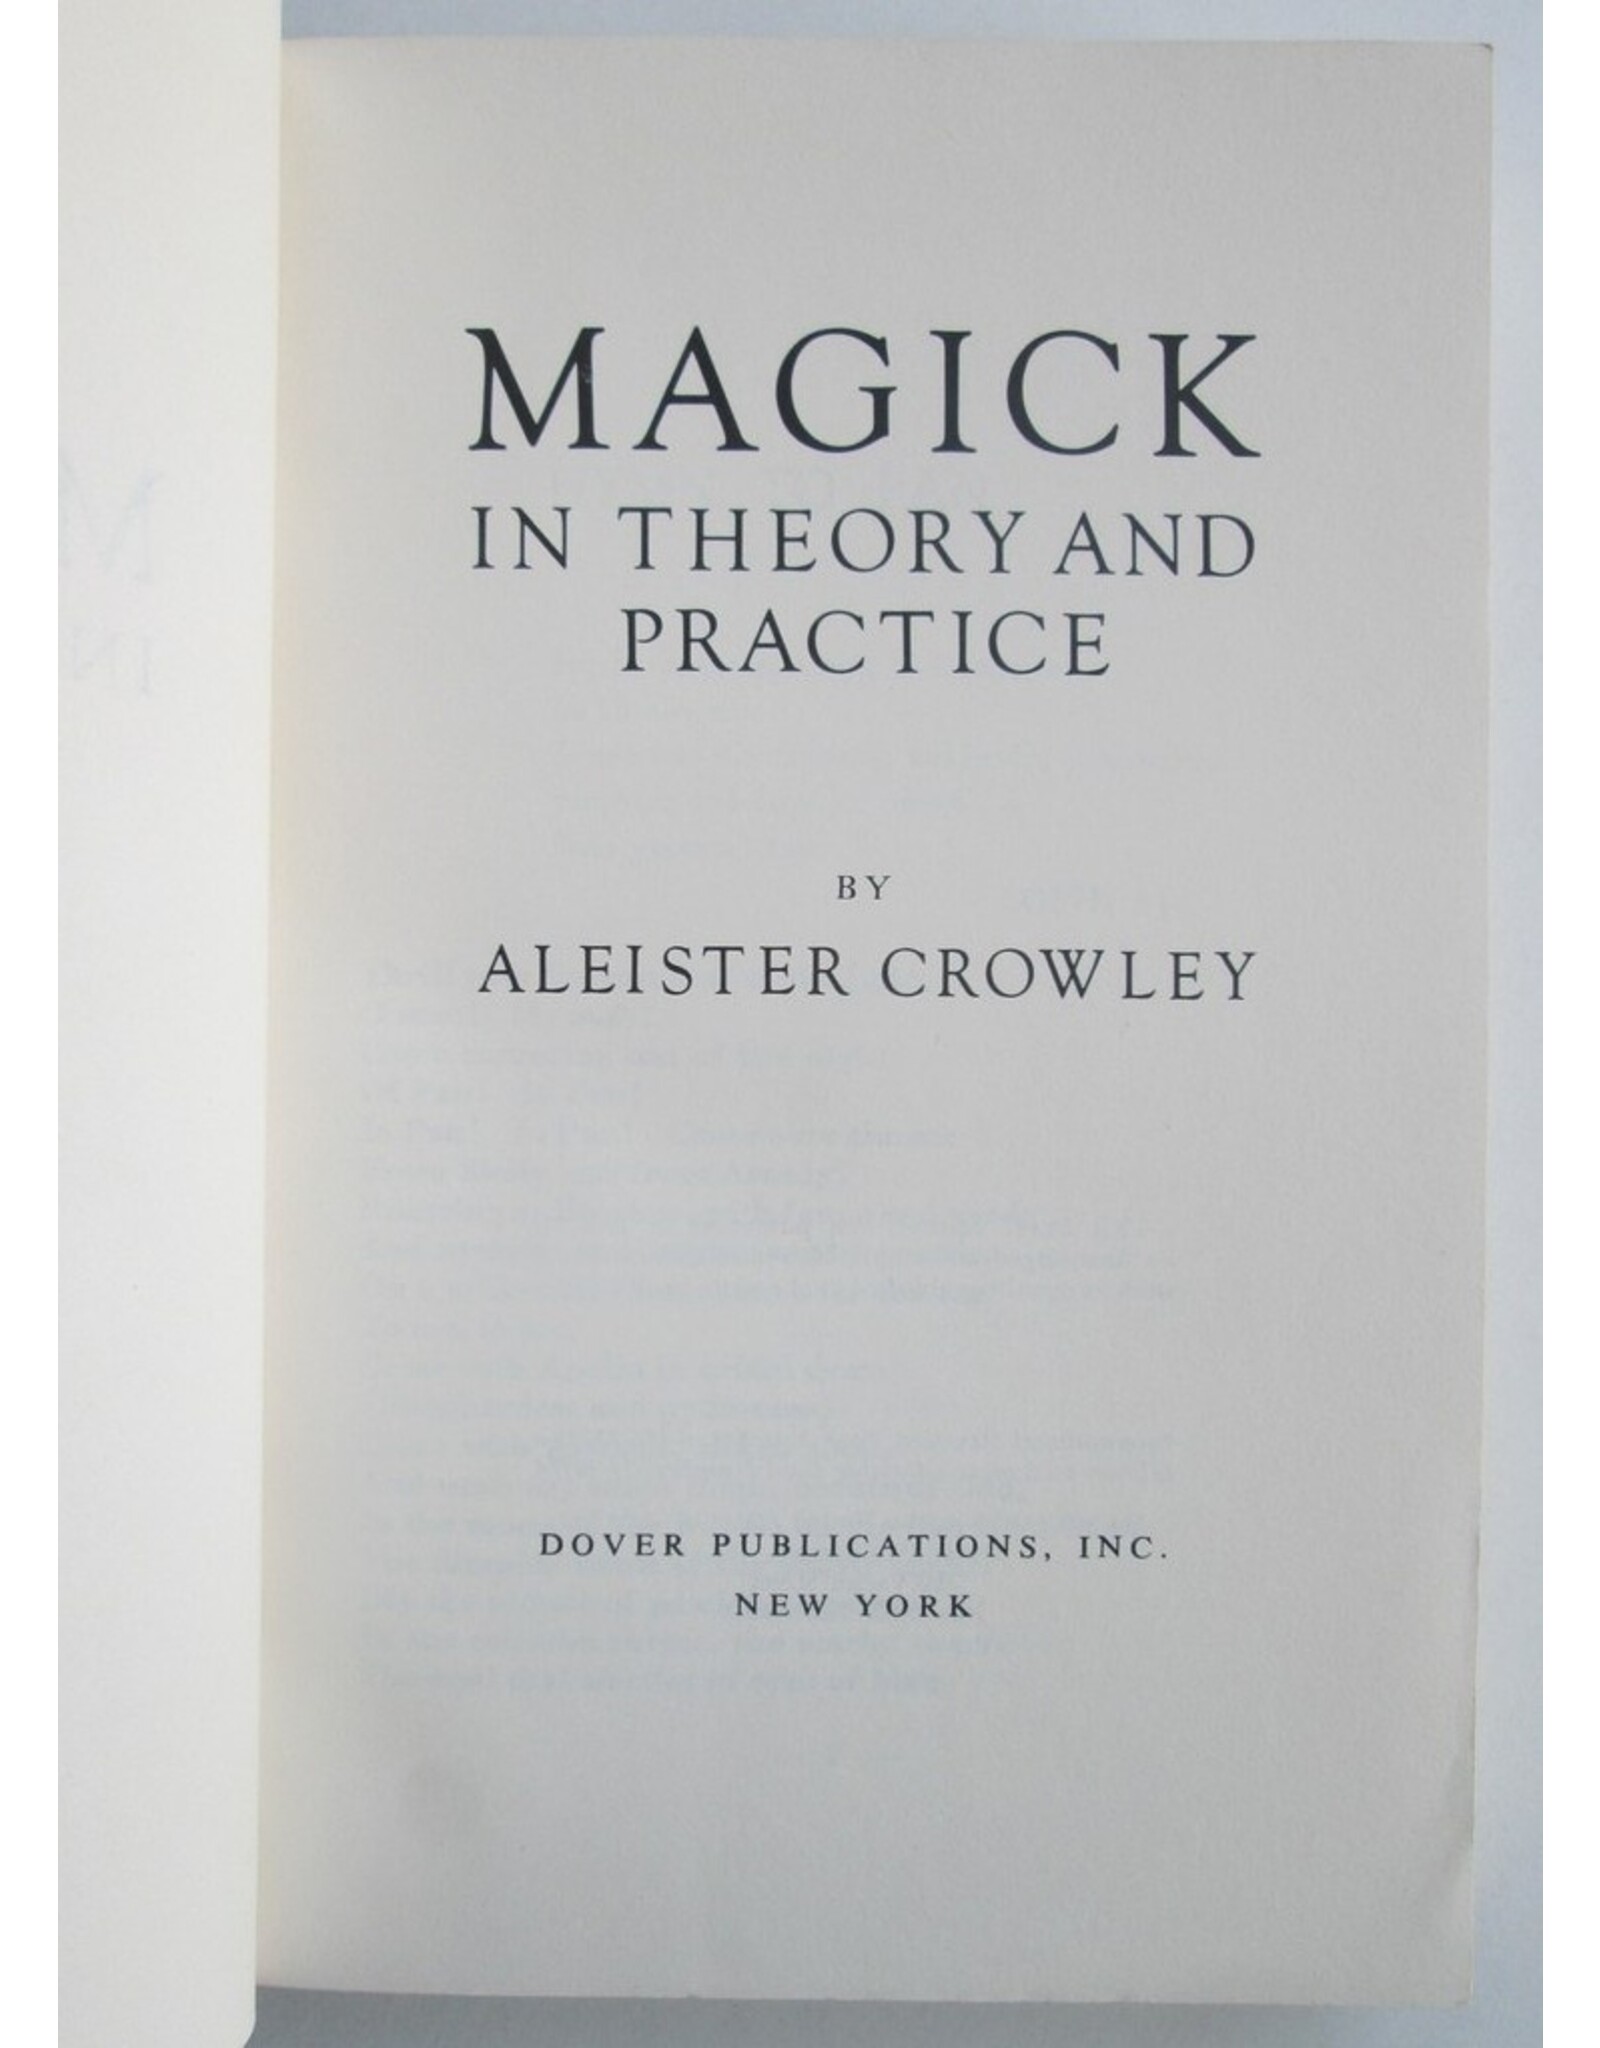 Aleister Crowley - Magick in Theory and Practice